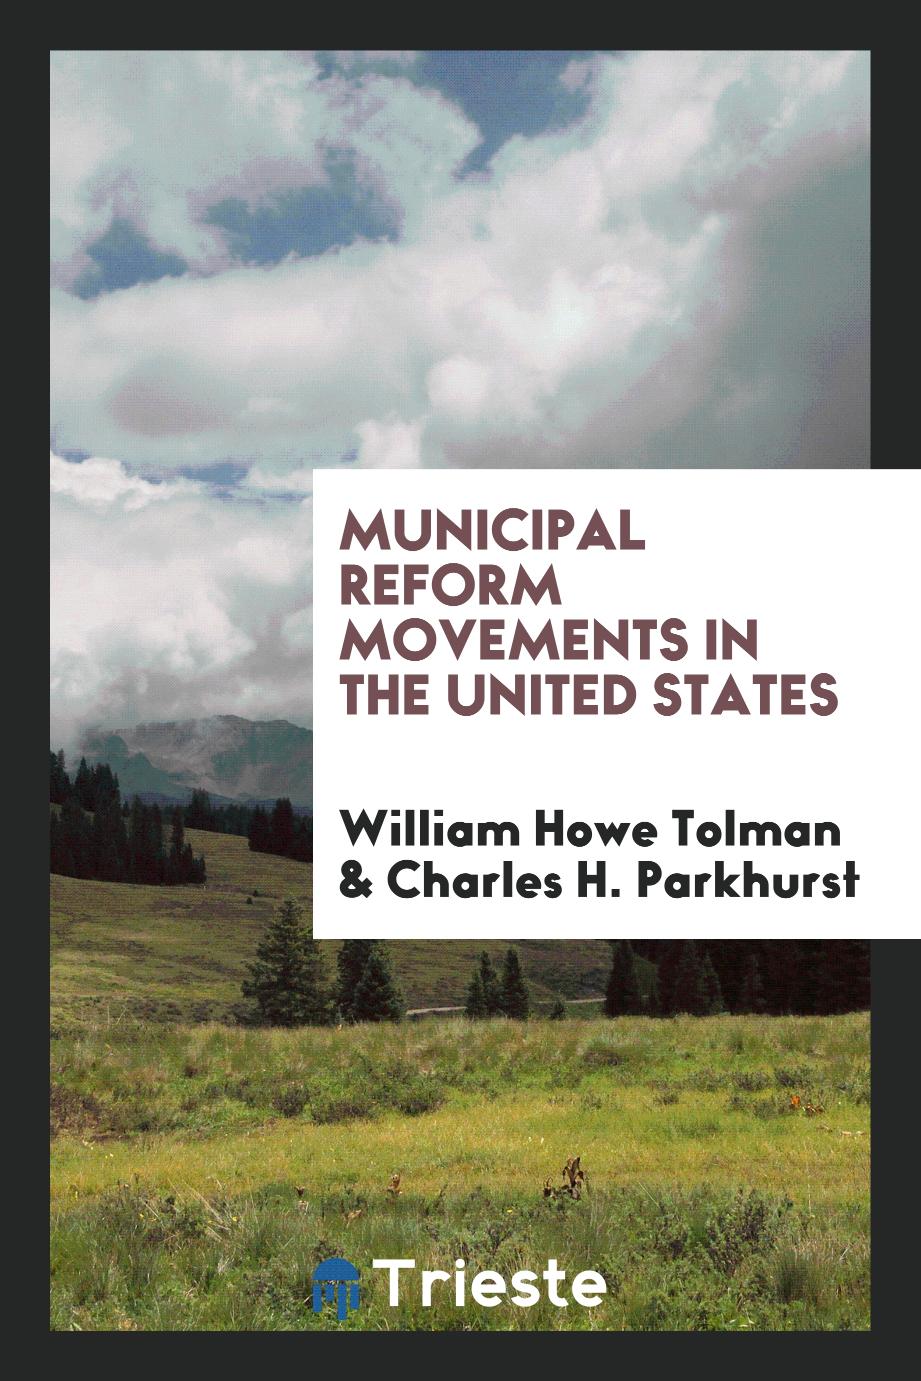 Municipal reform movements in the United States